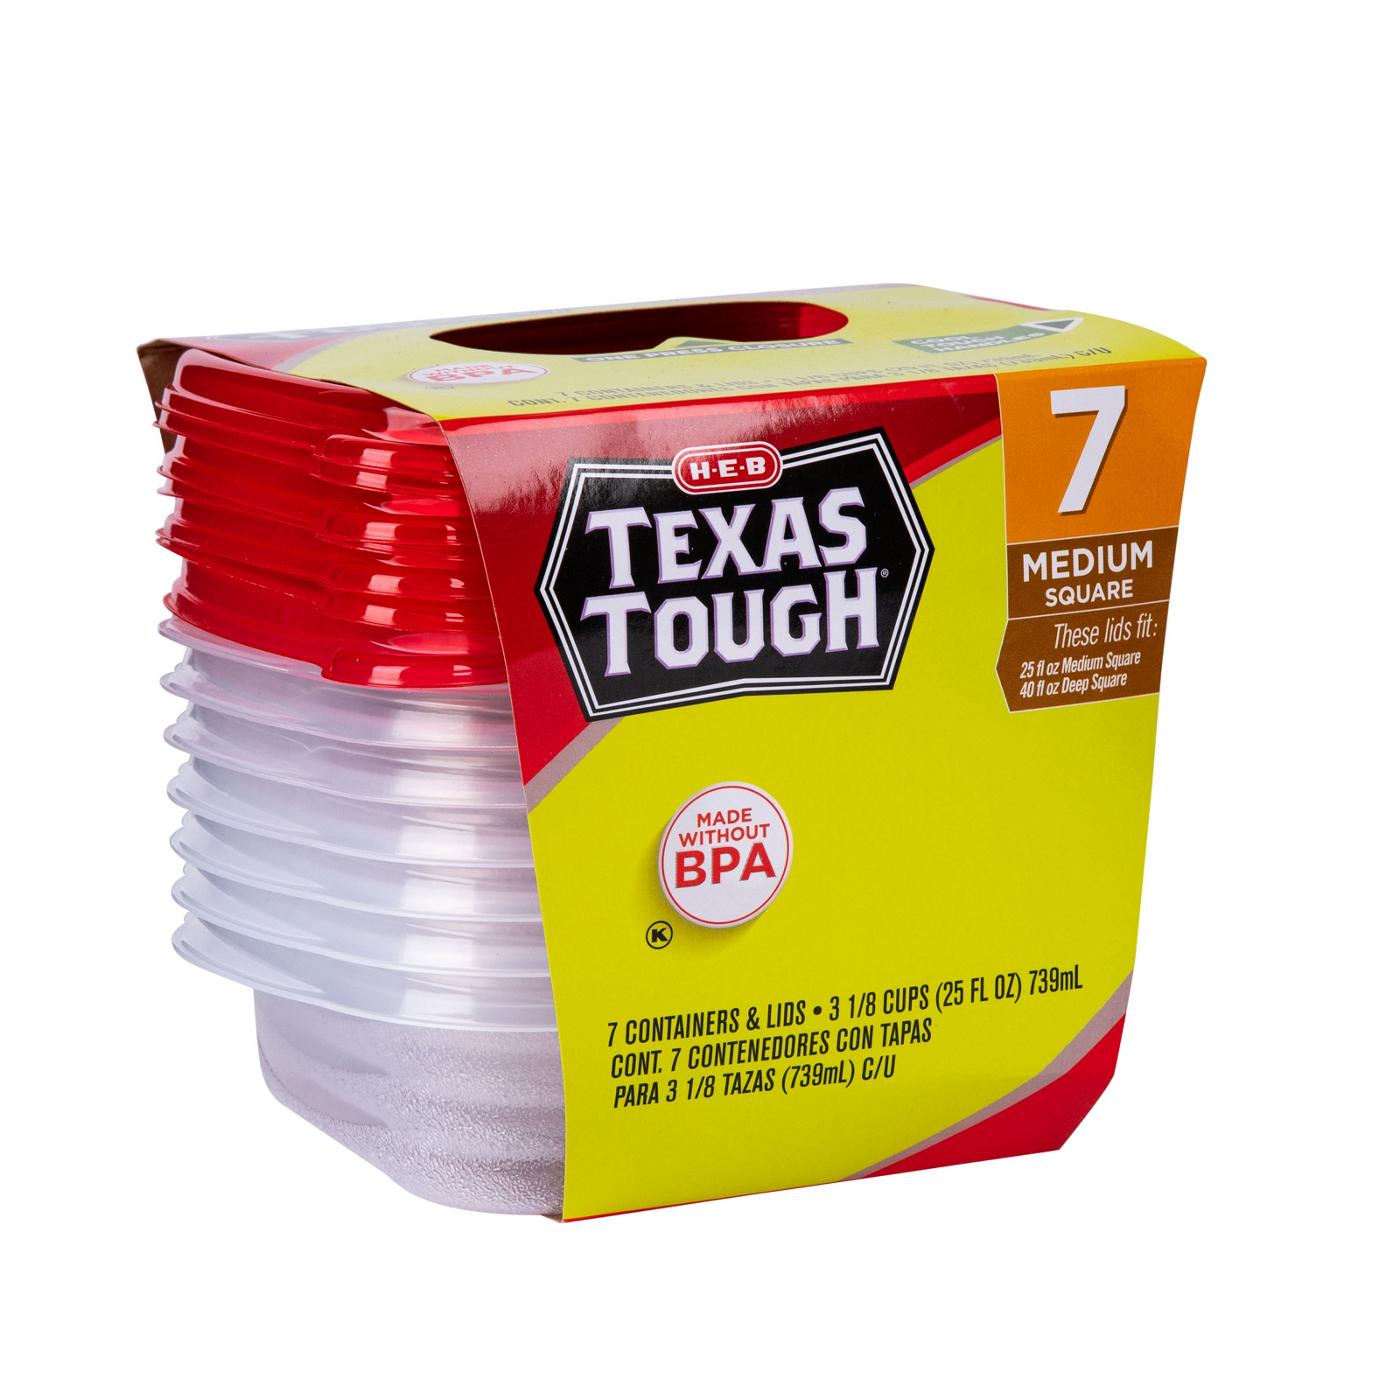 H-E-B Texas Tough Medium Square Reusable Containers with Lids; image 2 of 3